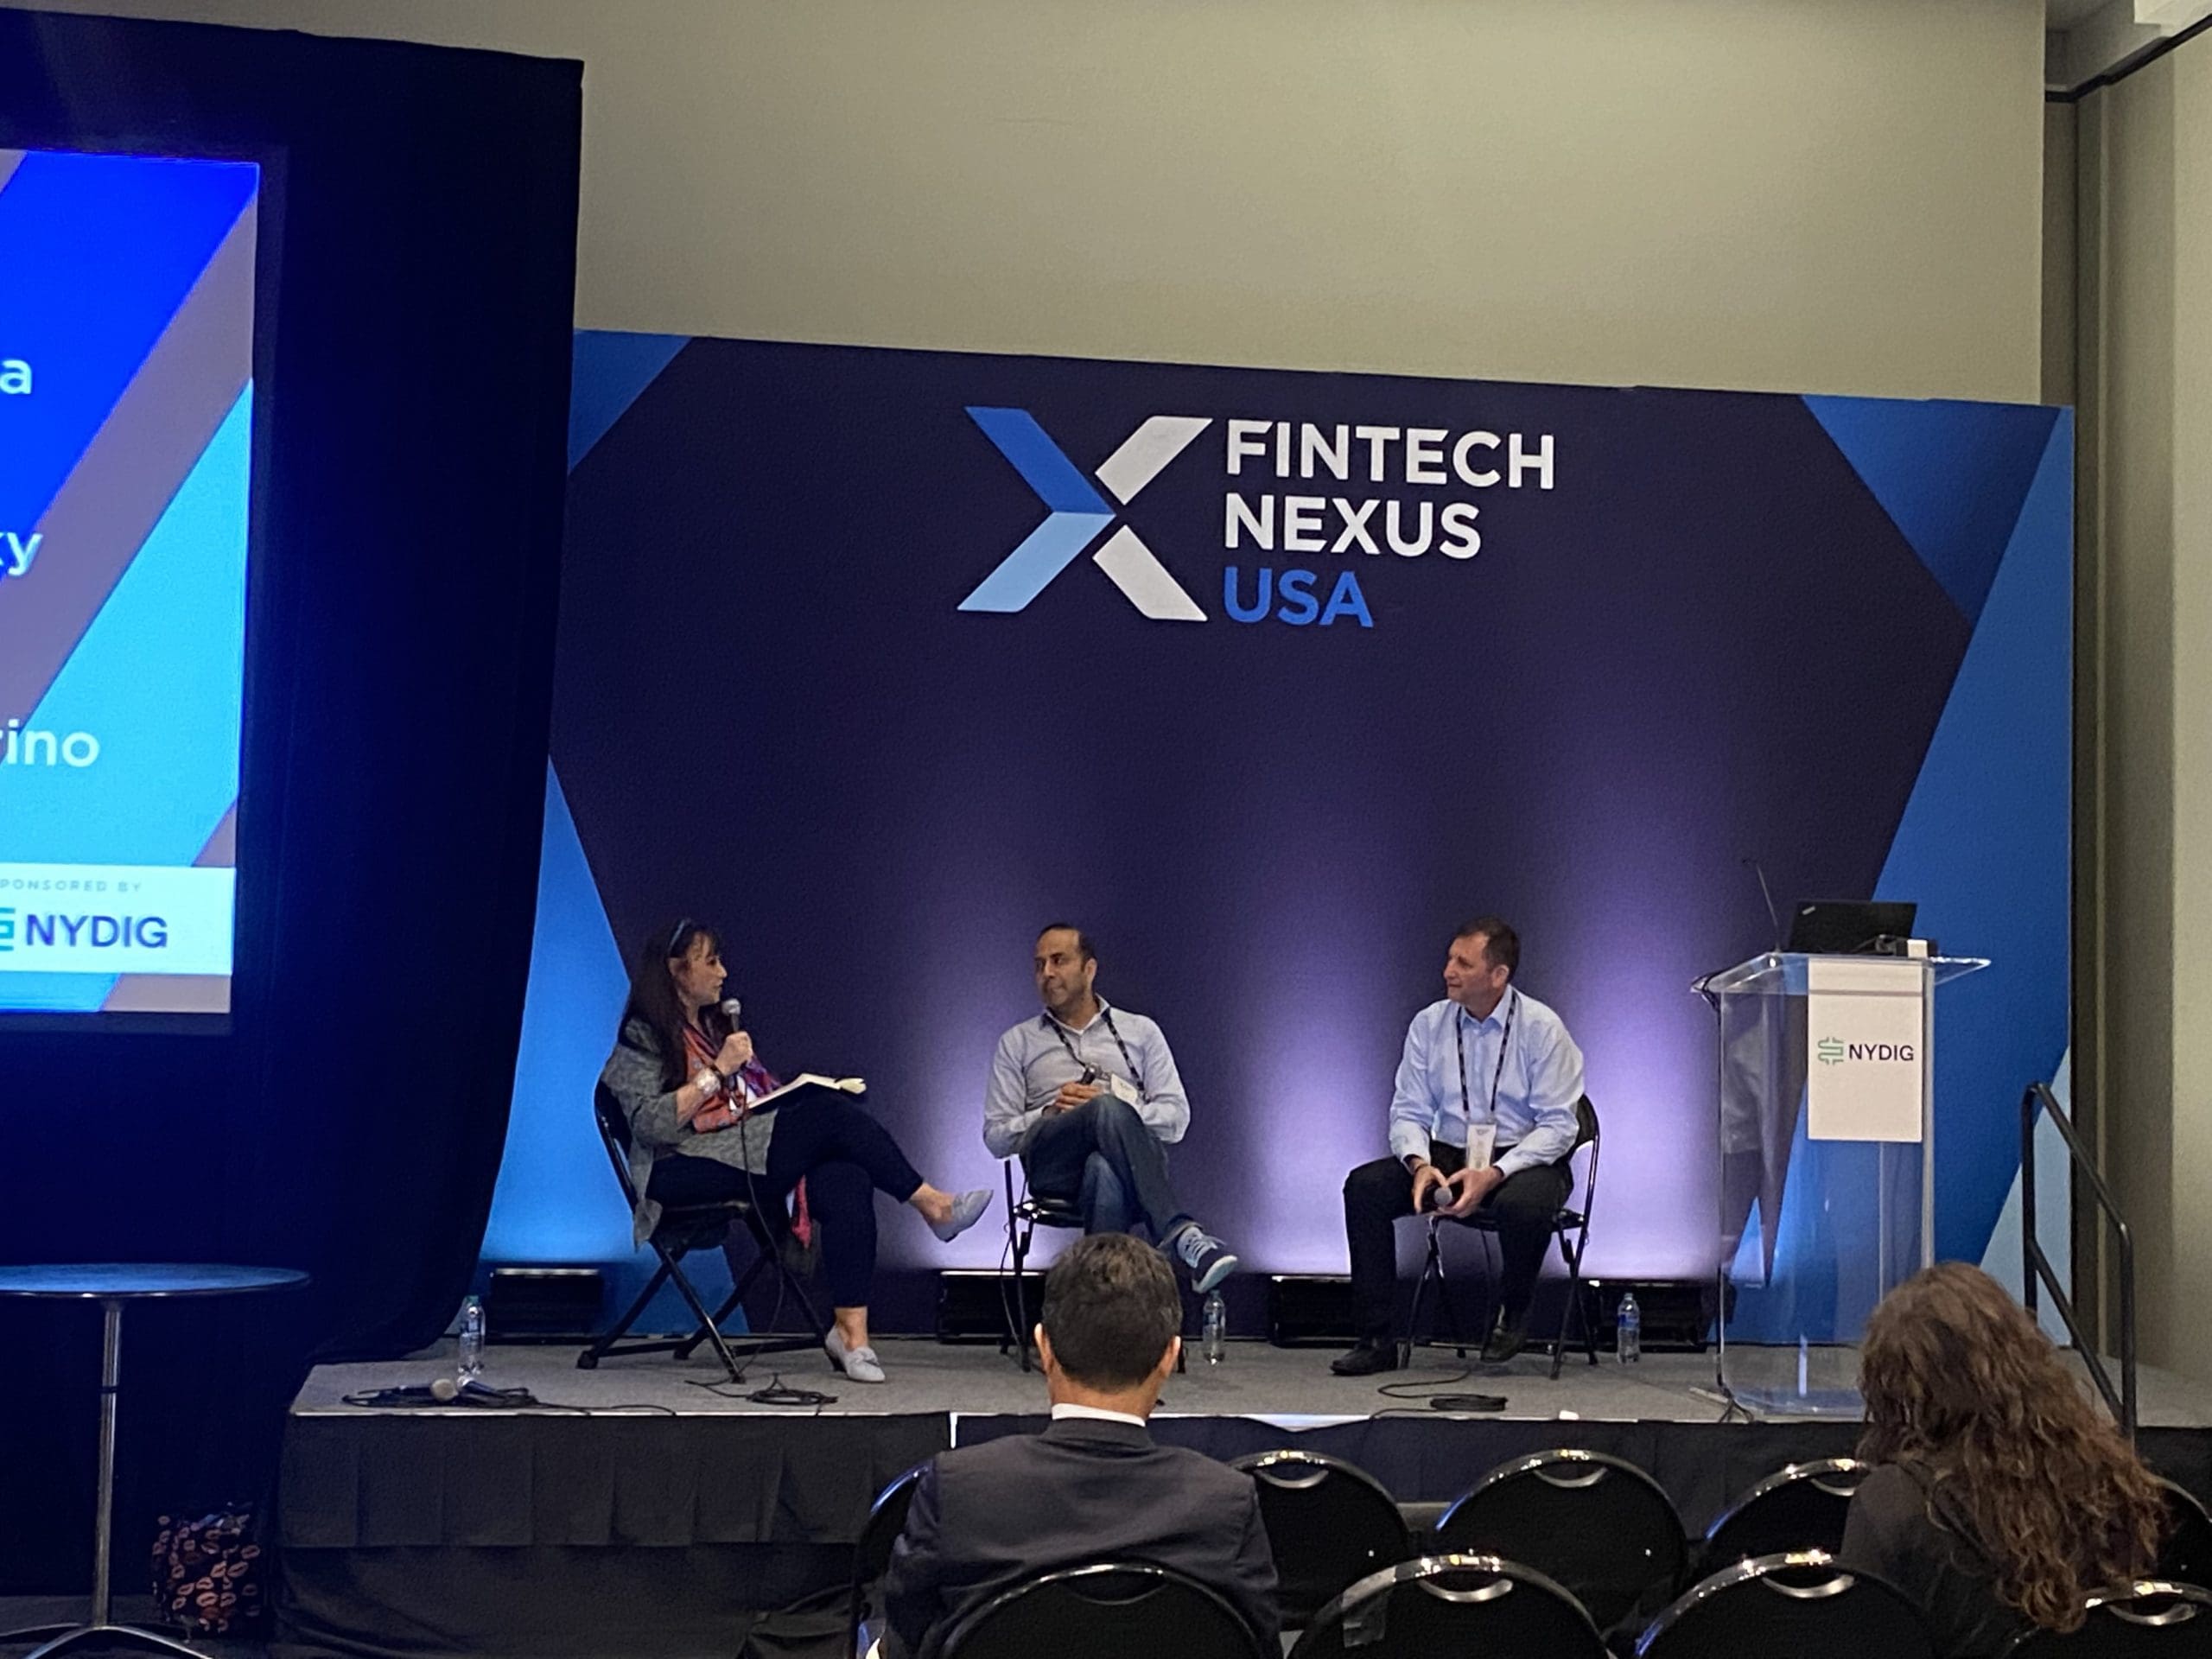  CEO of Celsius Alex Mashinsky (right) talked with panelist Ram Ahluwalia founder of Layer Zero Wealth (center) and moderator Helene Panzarino, Associate Director, Centre for Digital Banking & Finance at the LIBF at the Fintech Nexus USA conference on May 25th, 2022 in New York City